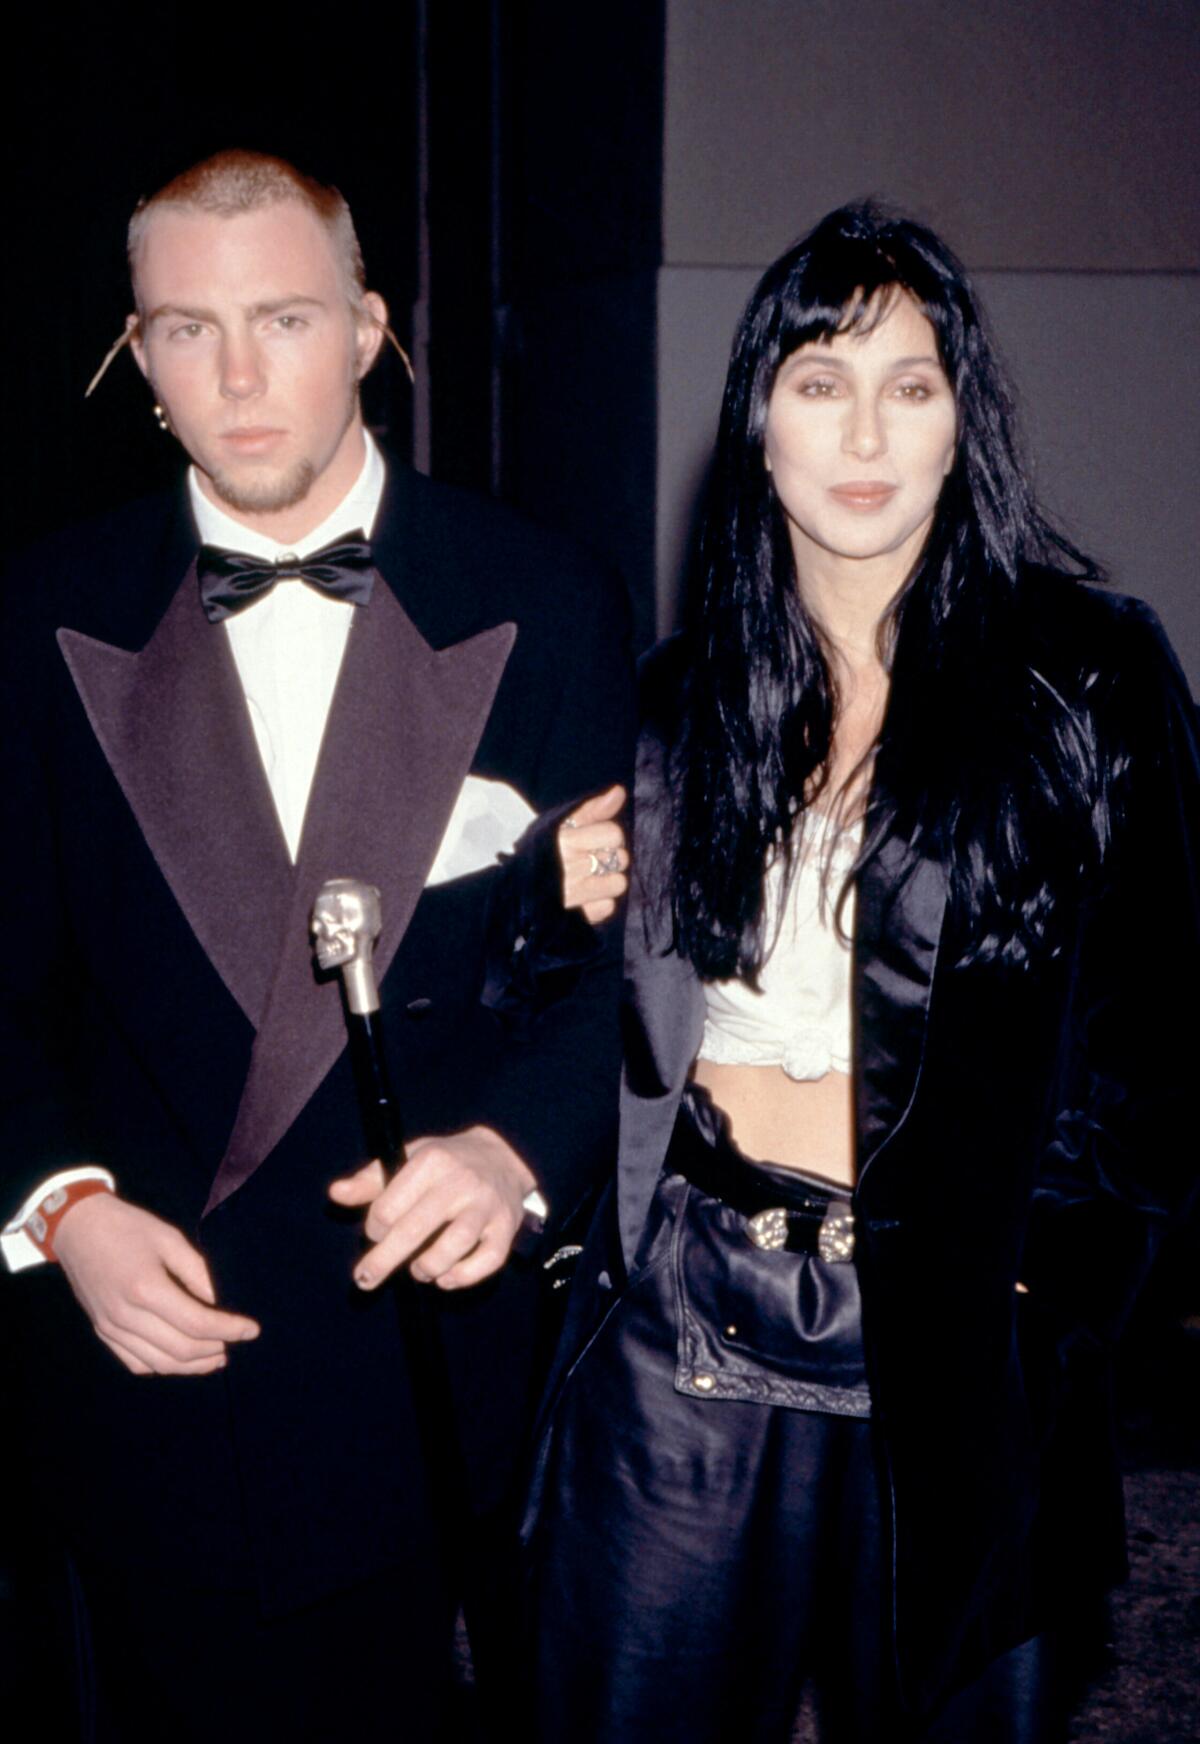 Elijah Blue Allman wears a tuxedo and links arms with his mother Cher, wearing a long black coat and white crop top